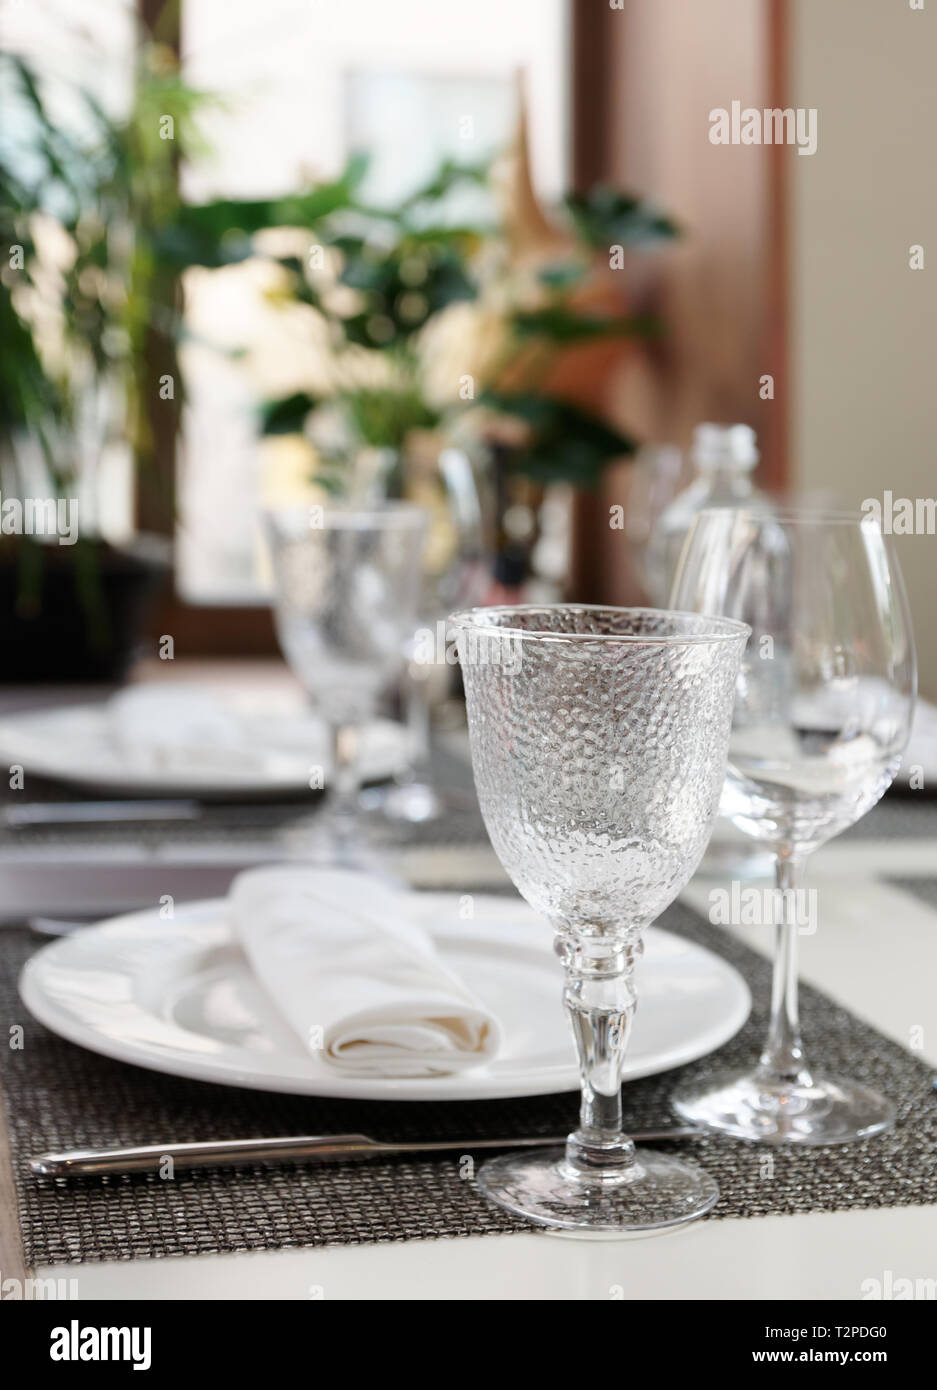 Place setting near the window in an expensive restaurant Stock Photo